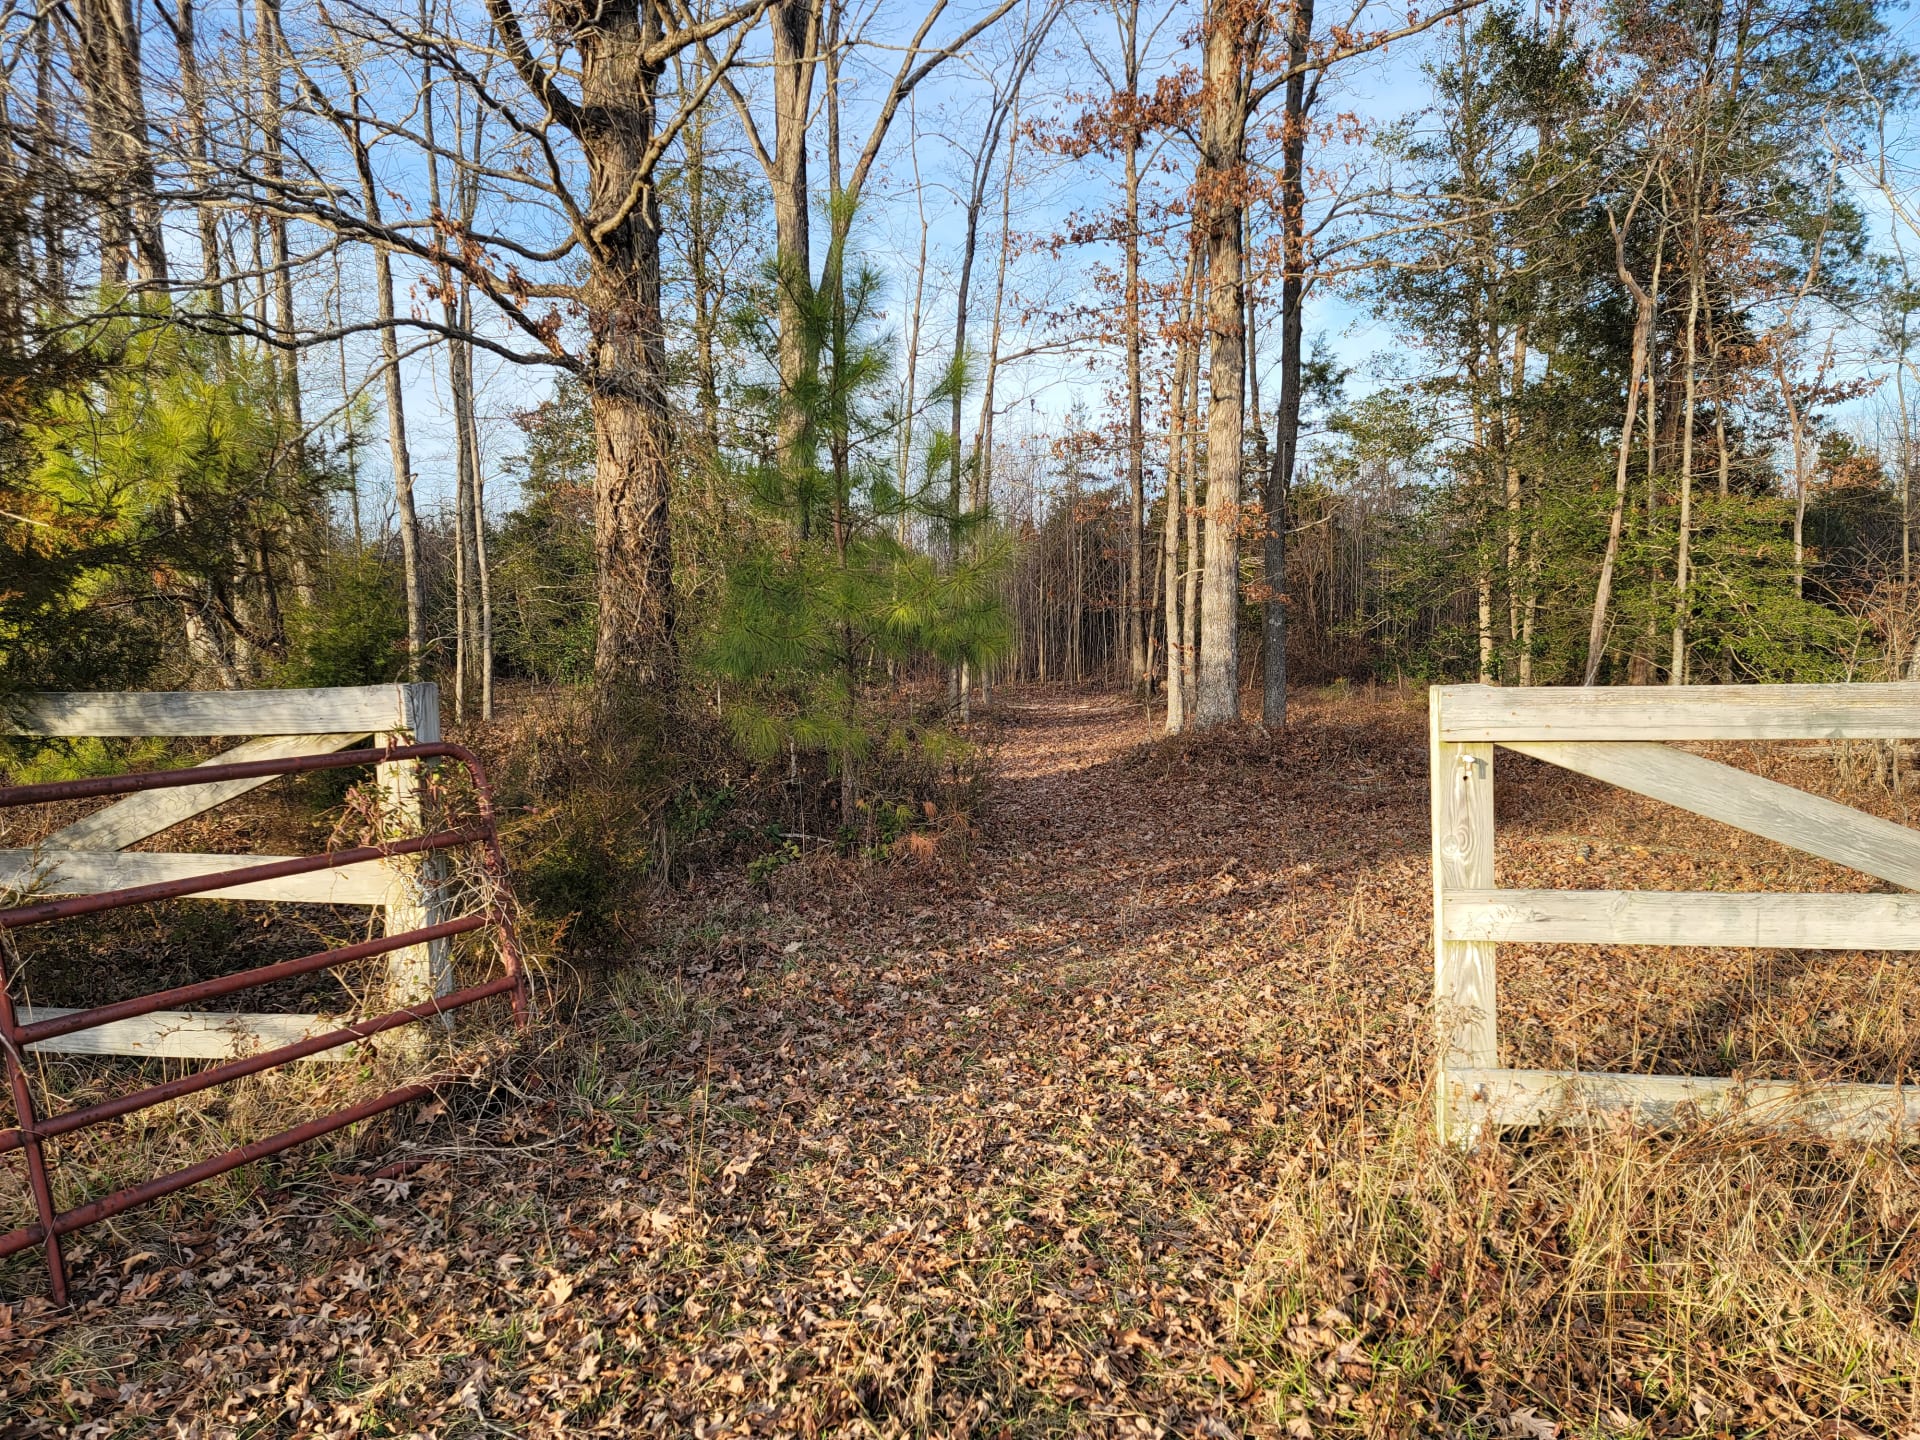 One of the cattle gates that lead into the wooded areas.